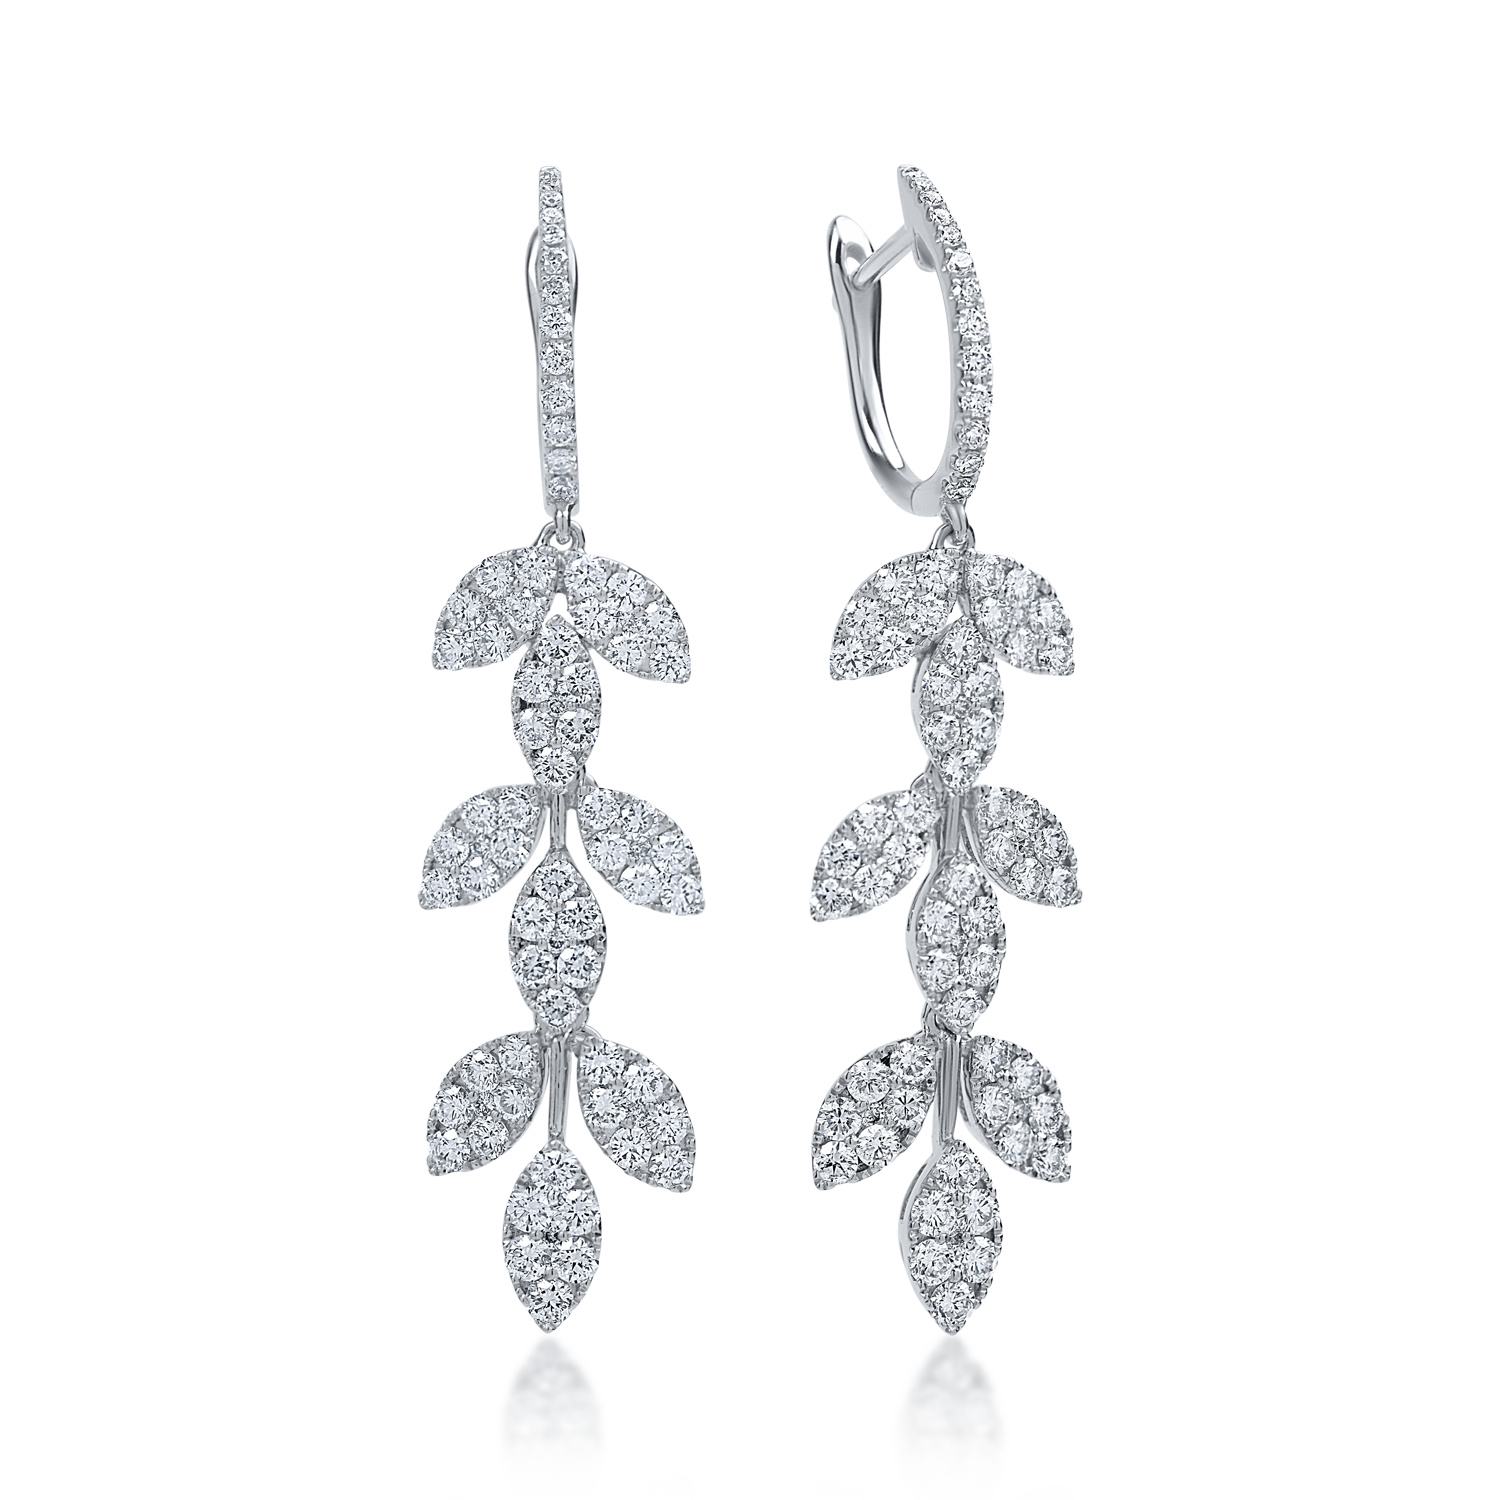 White gold earrings with 2.39ct diamonds